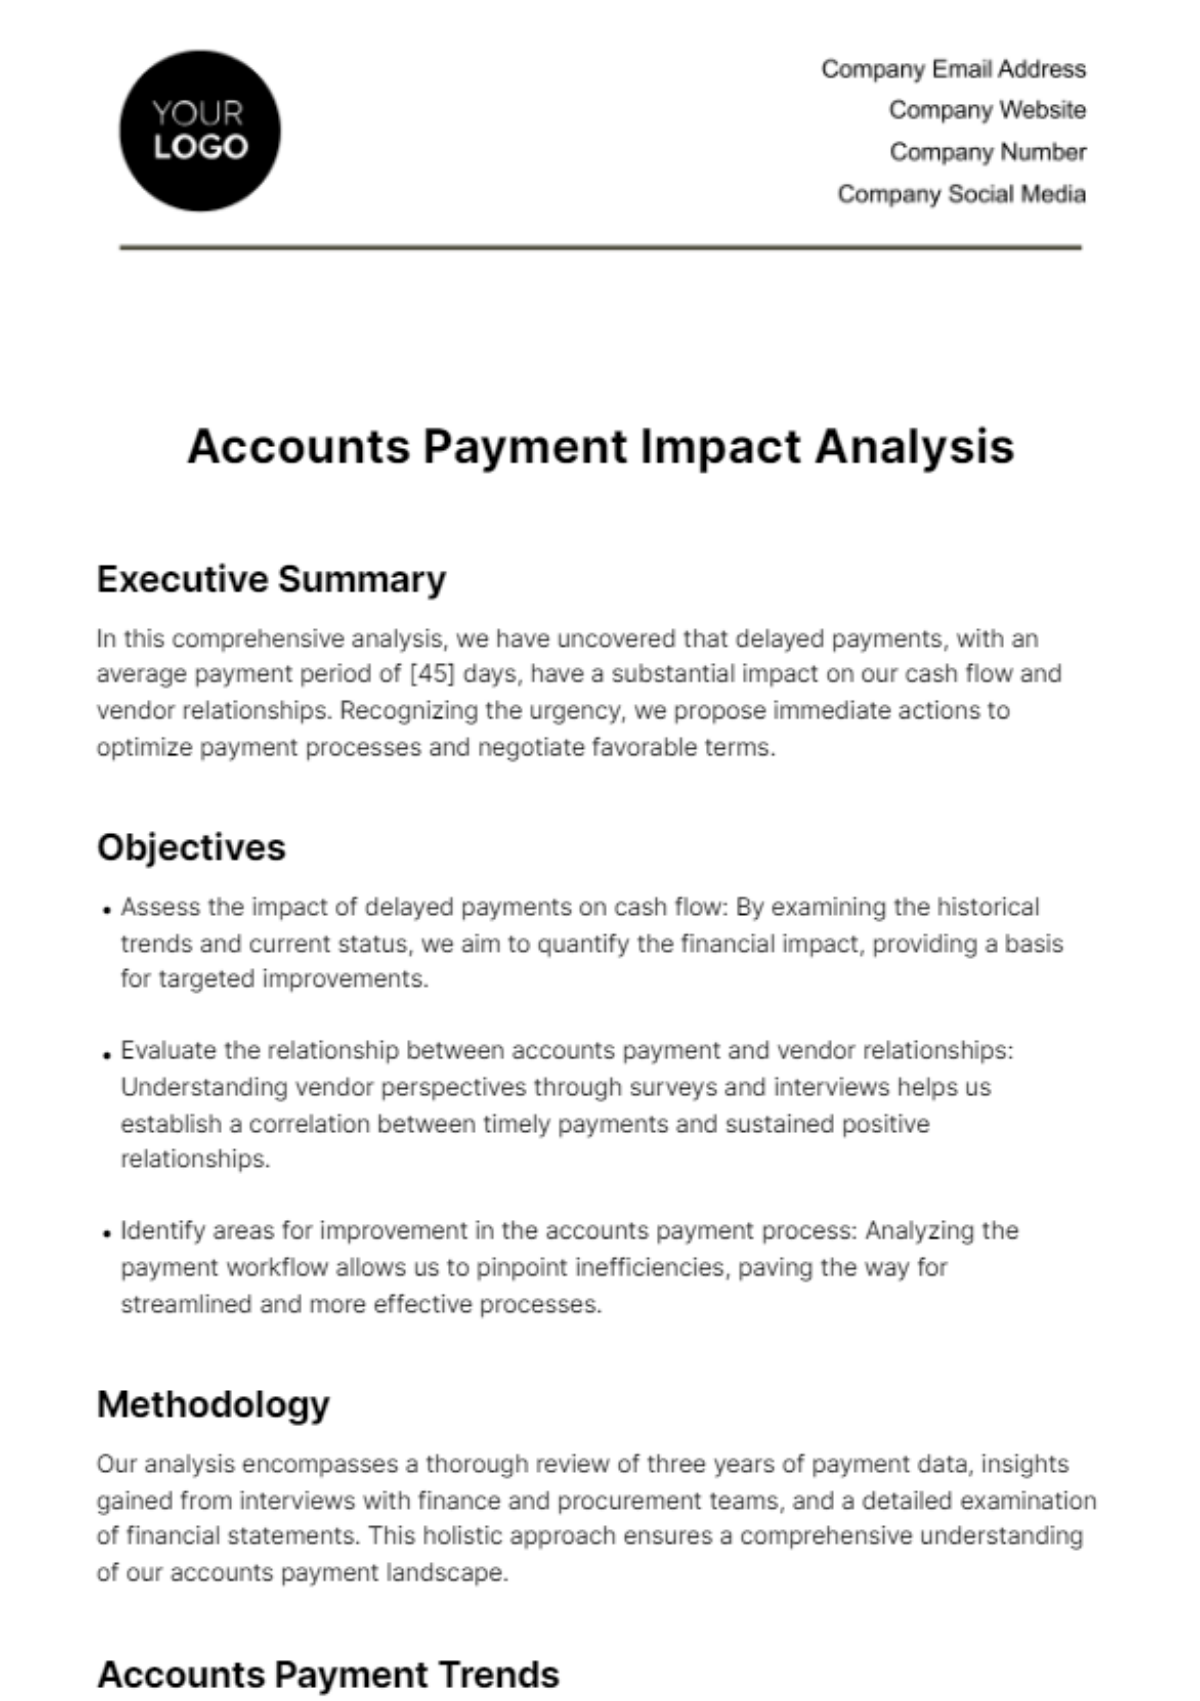 Accounts Payment Impact Analysis Template